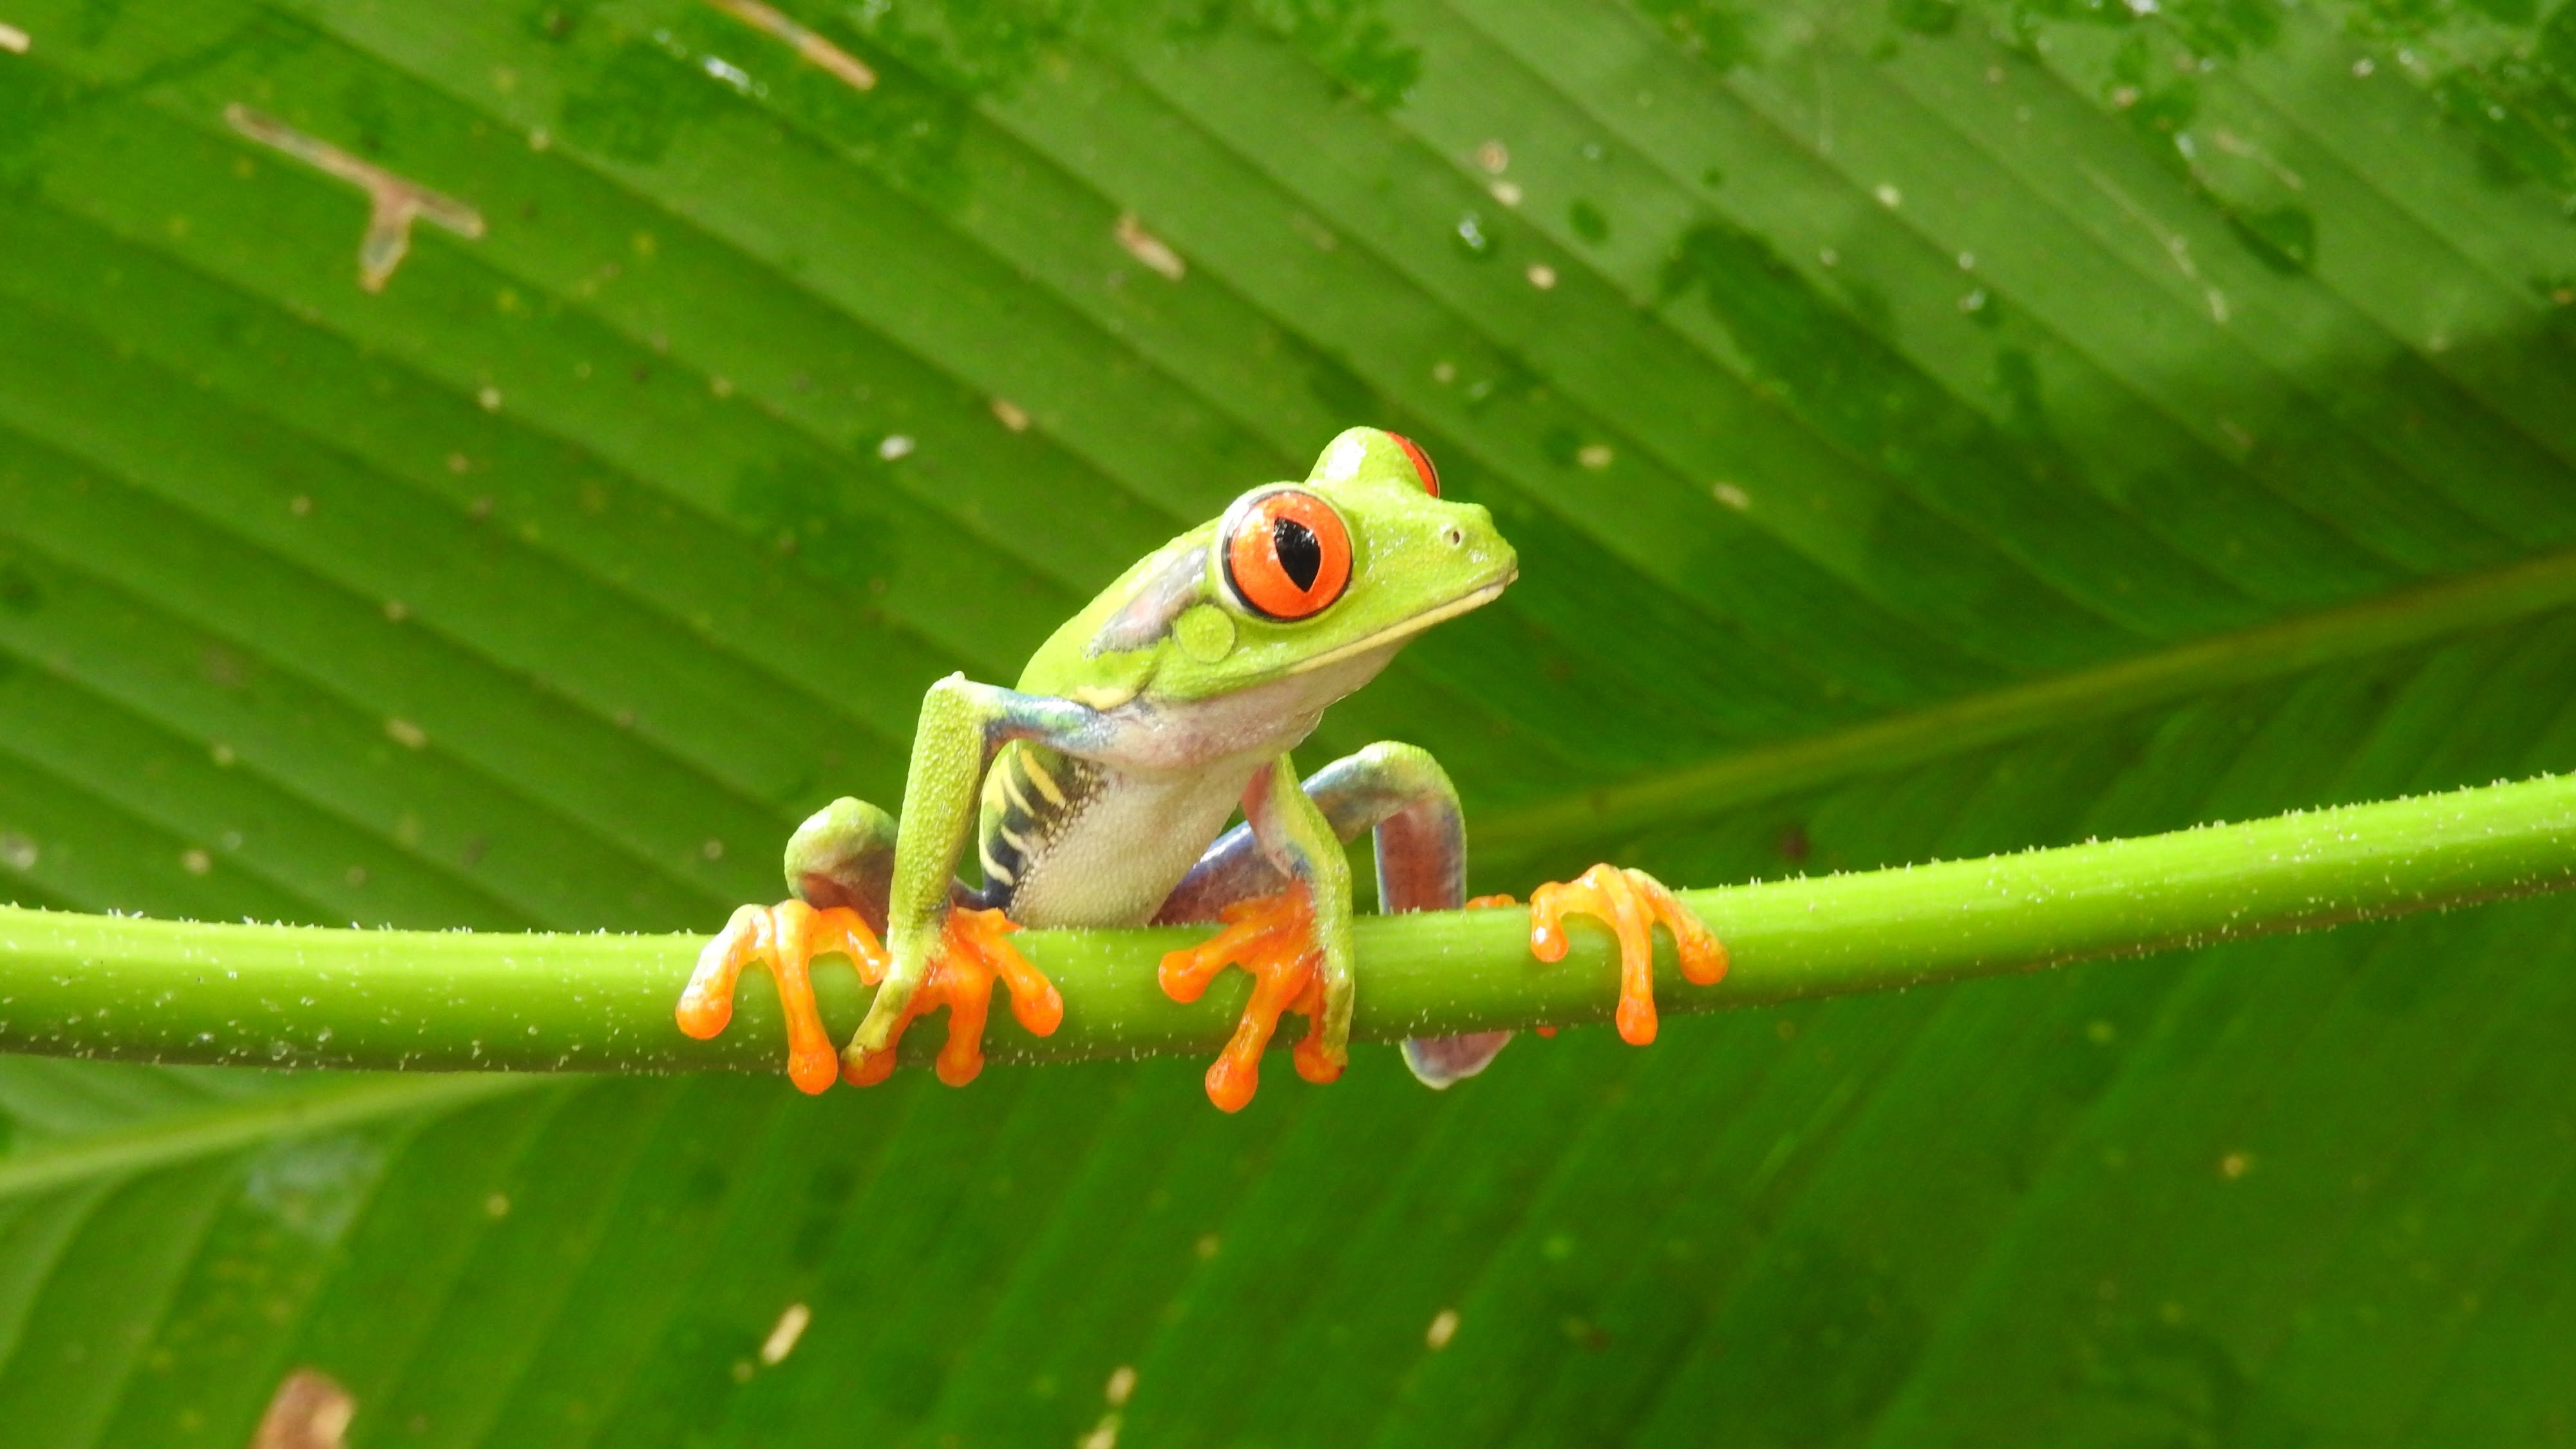 Glass frogs - Poison Dart frogs -Tree frogs - Toads, Costa Rica ...